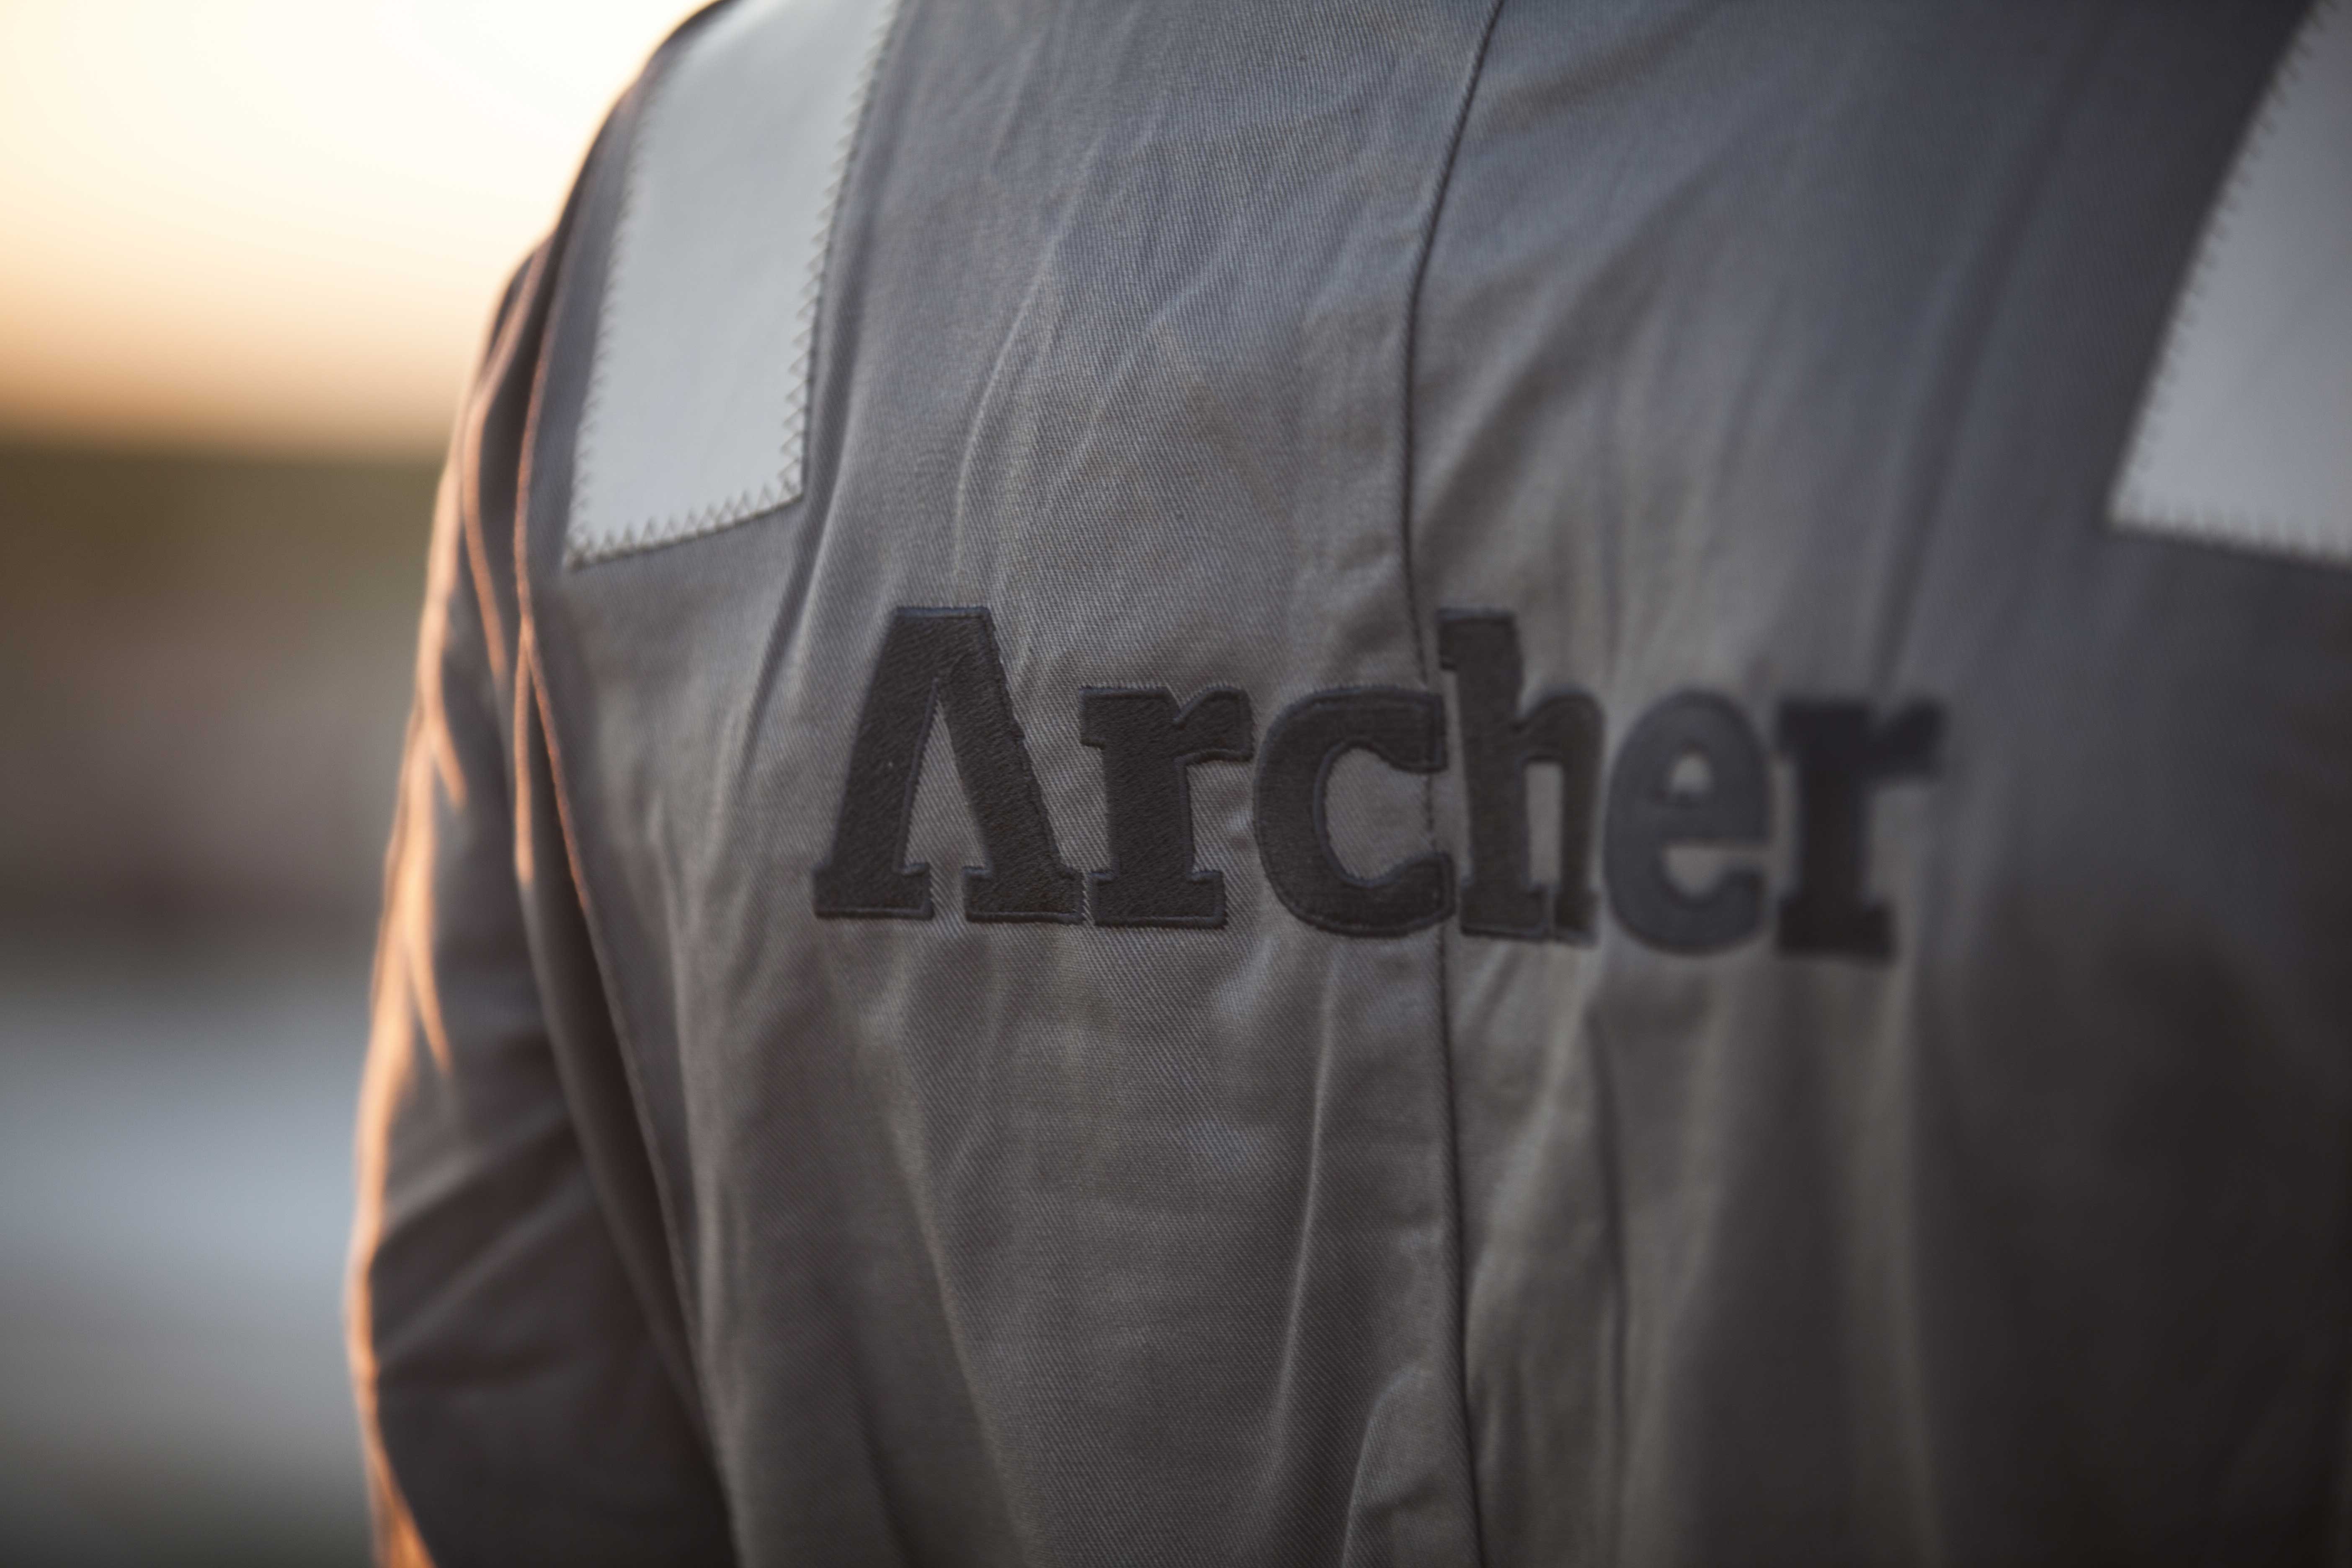 Archer increases 2023 guidance as it closes purchase of P&A specialist